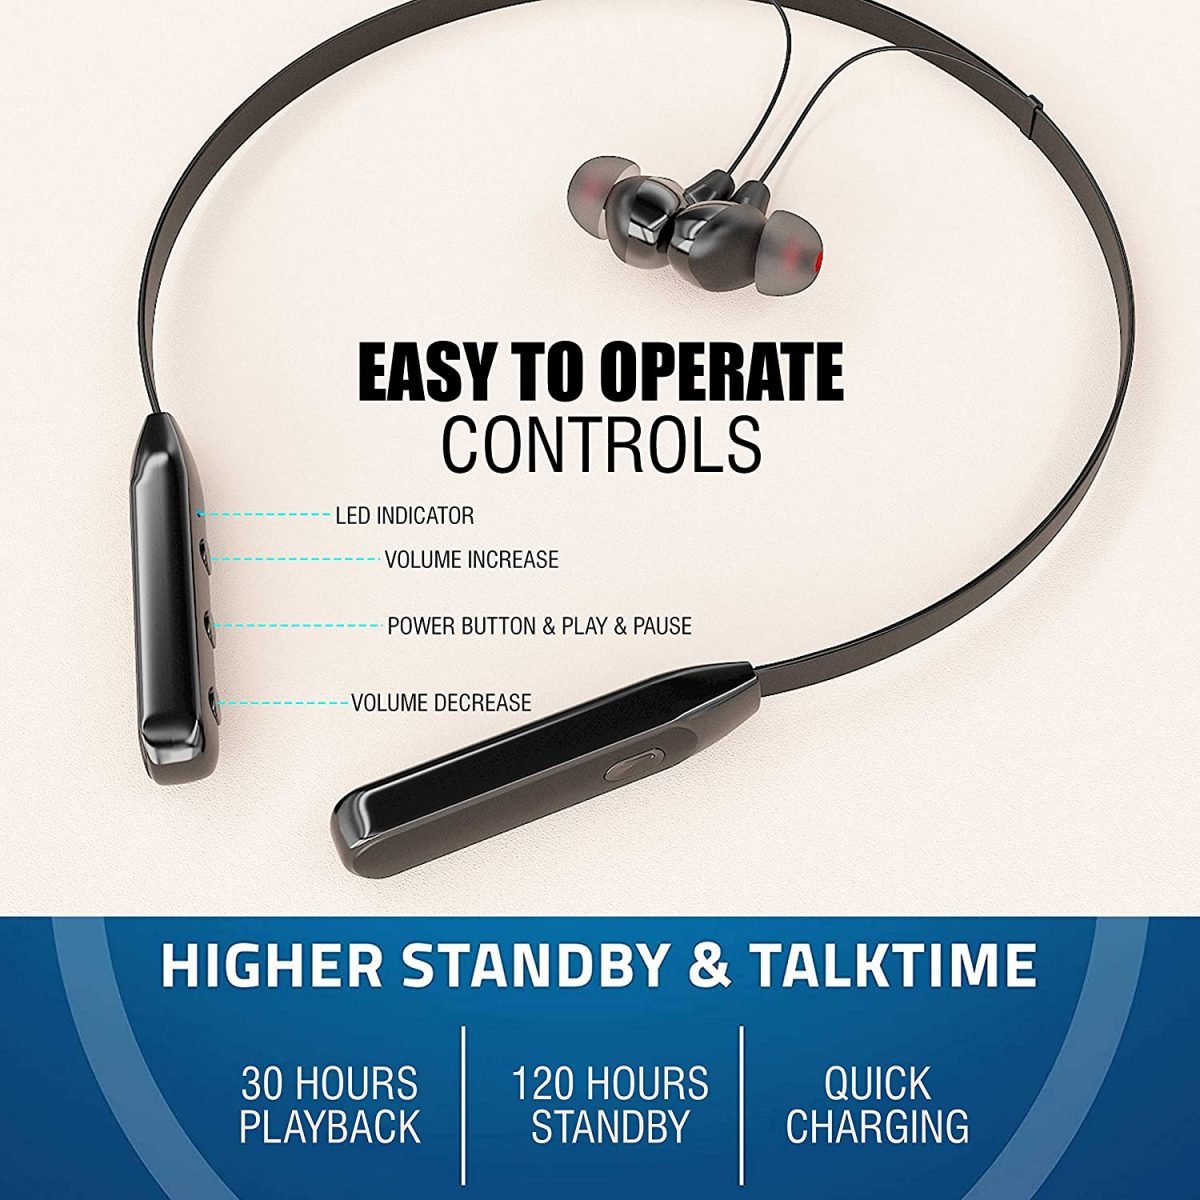 UBON Bluetooth Earphone CL-50 Quick Charge Wireless Neckband up to 45 Hours Playtime, sports earphone With mic For calling, In-Ear Headset for Travelling, Running, Gyming, and other Daily Activities